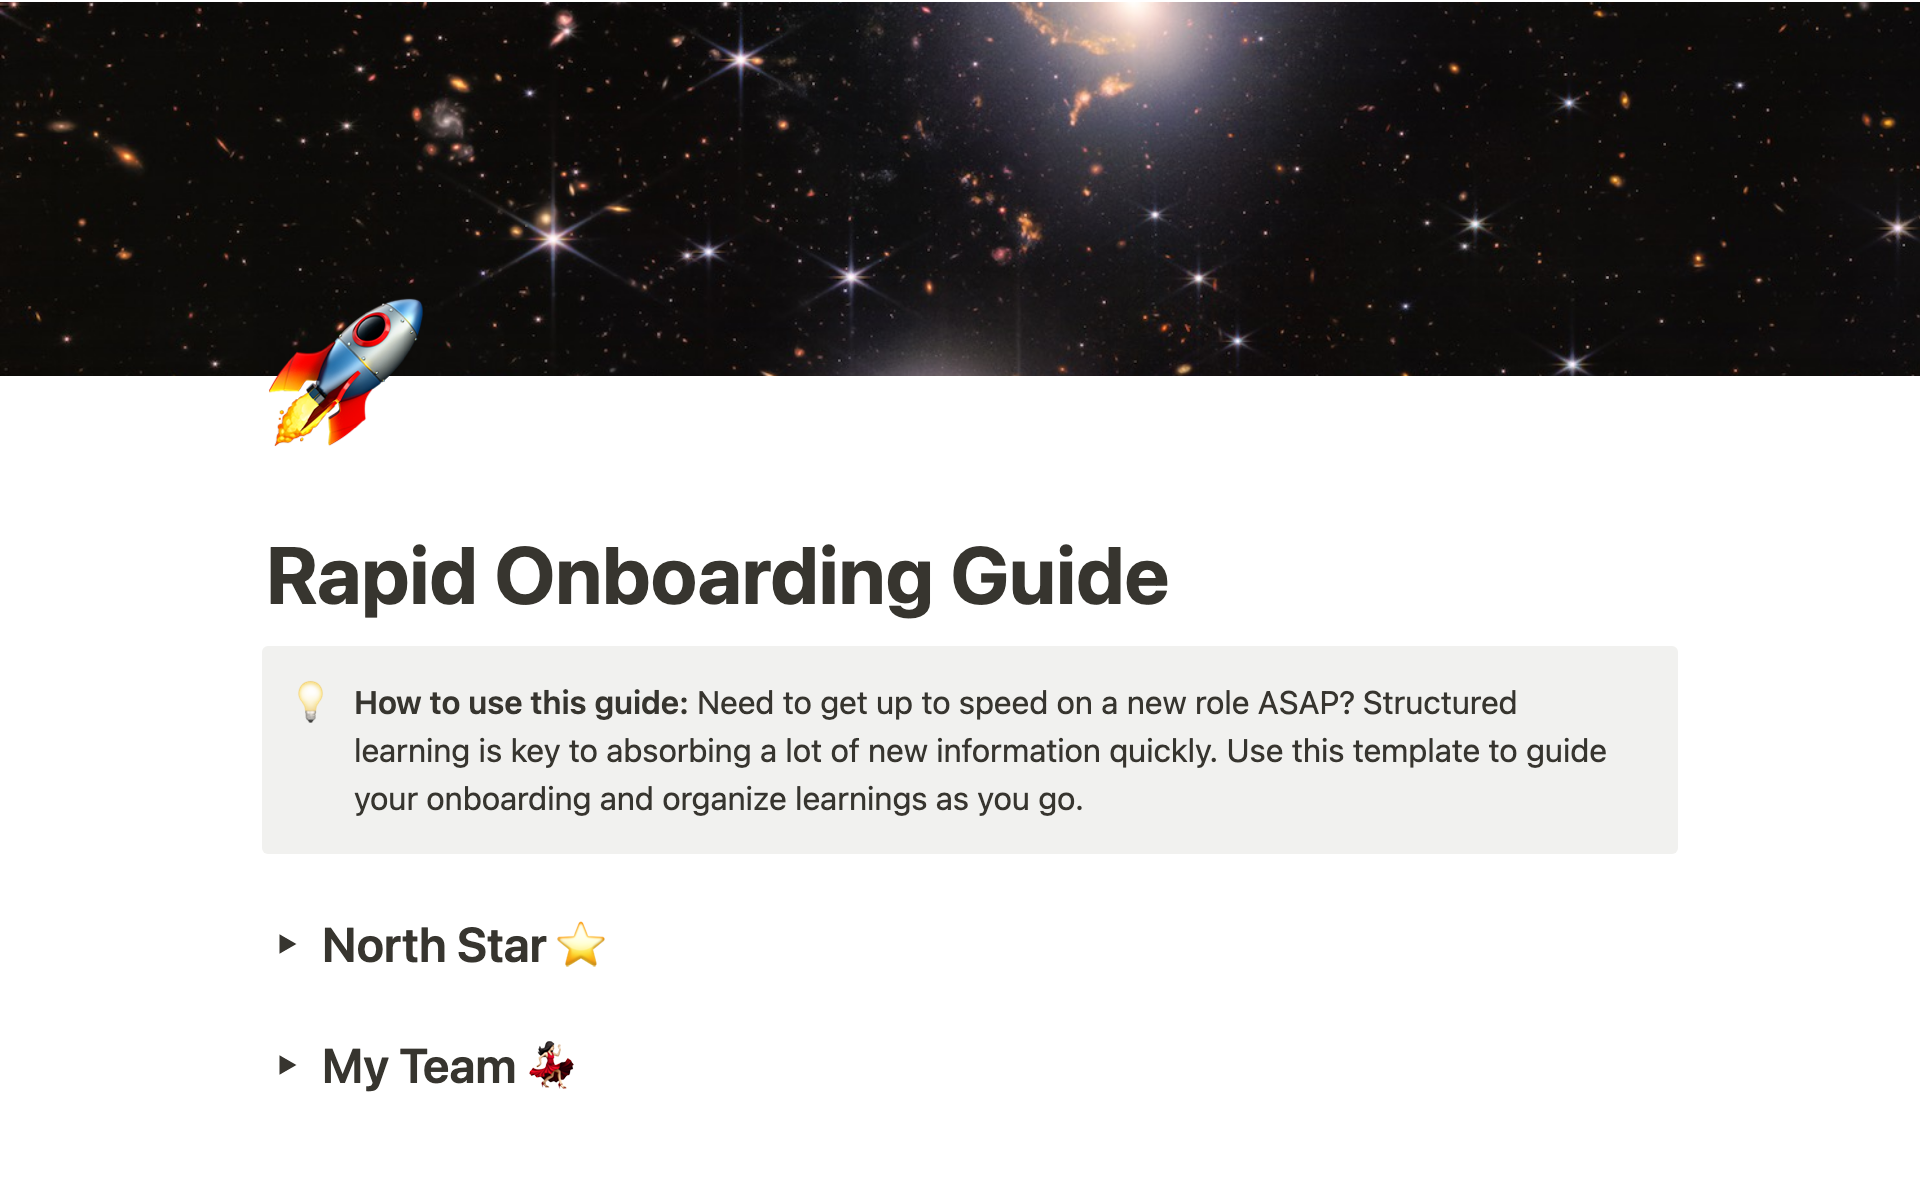 Use this template to structure onboarding learnings and get up to speed on your new role fast.